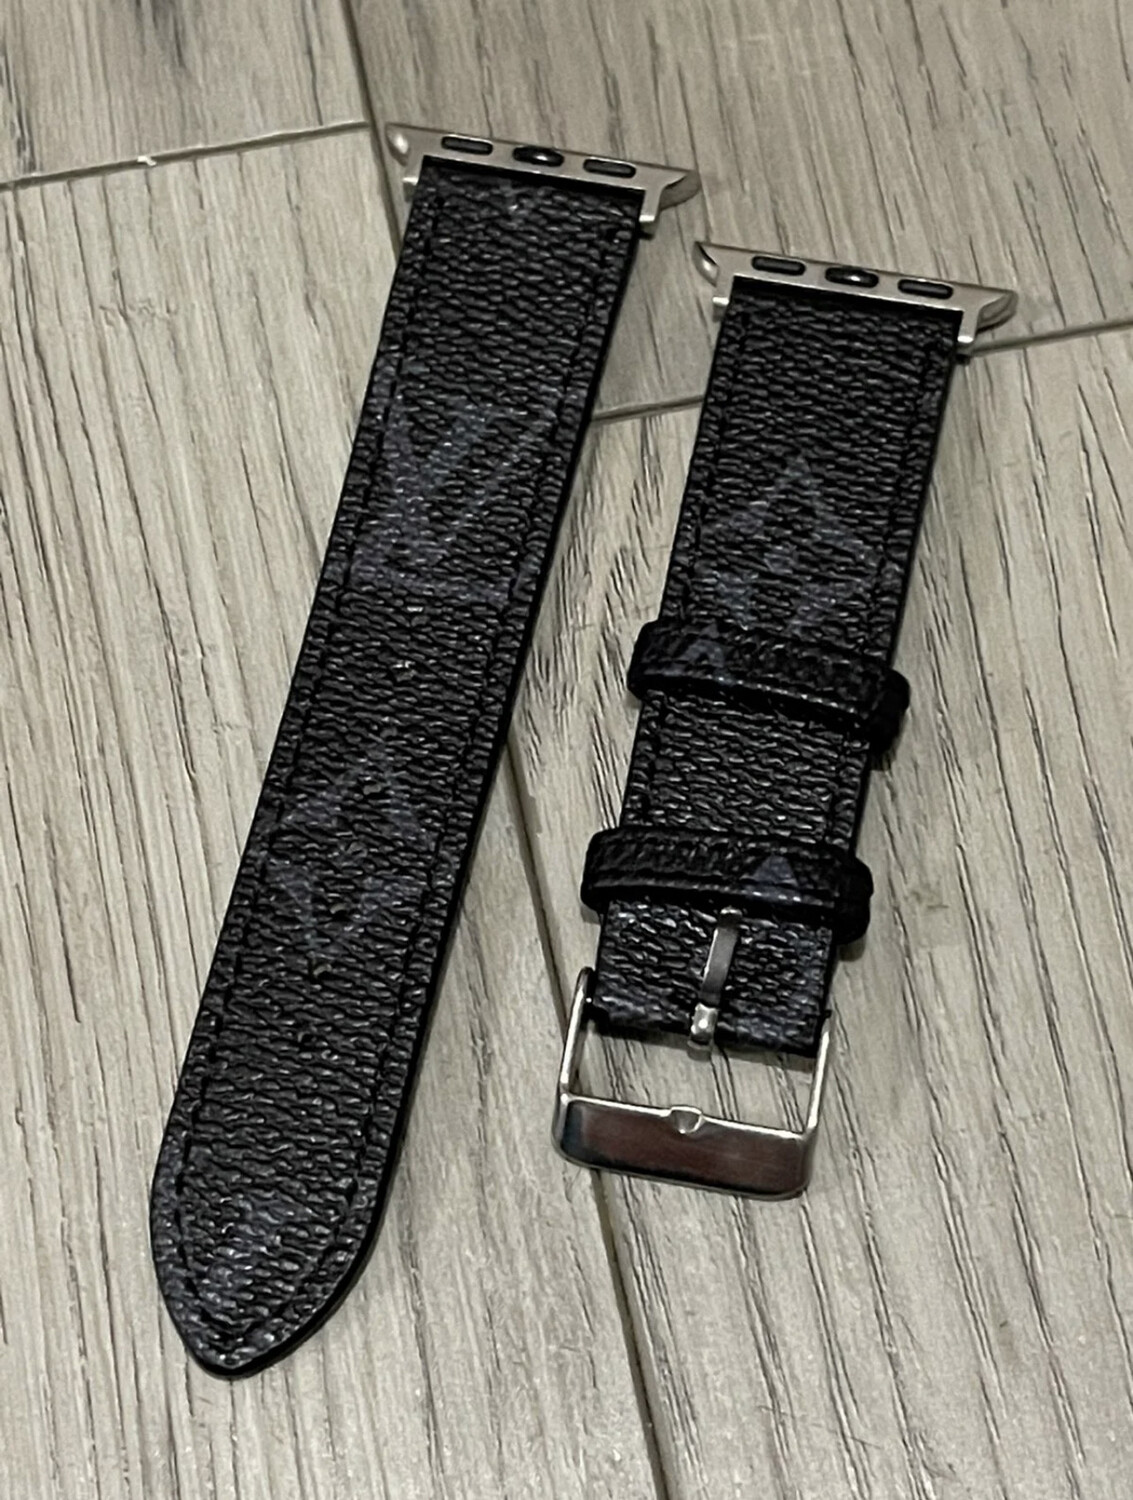 Upcycled Louis Vuitton Apple Watch